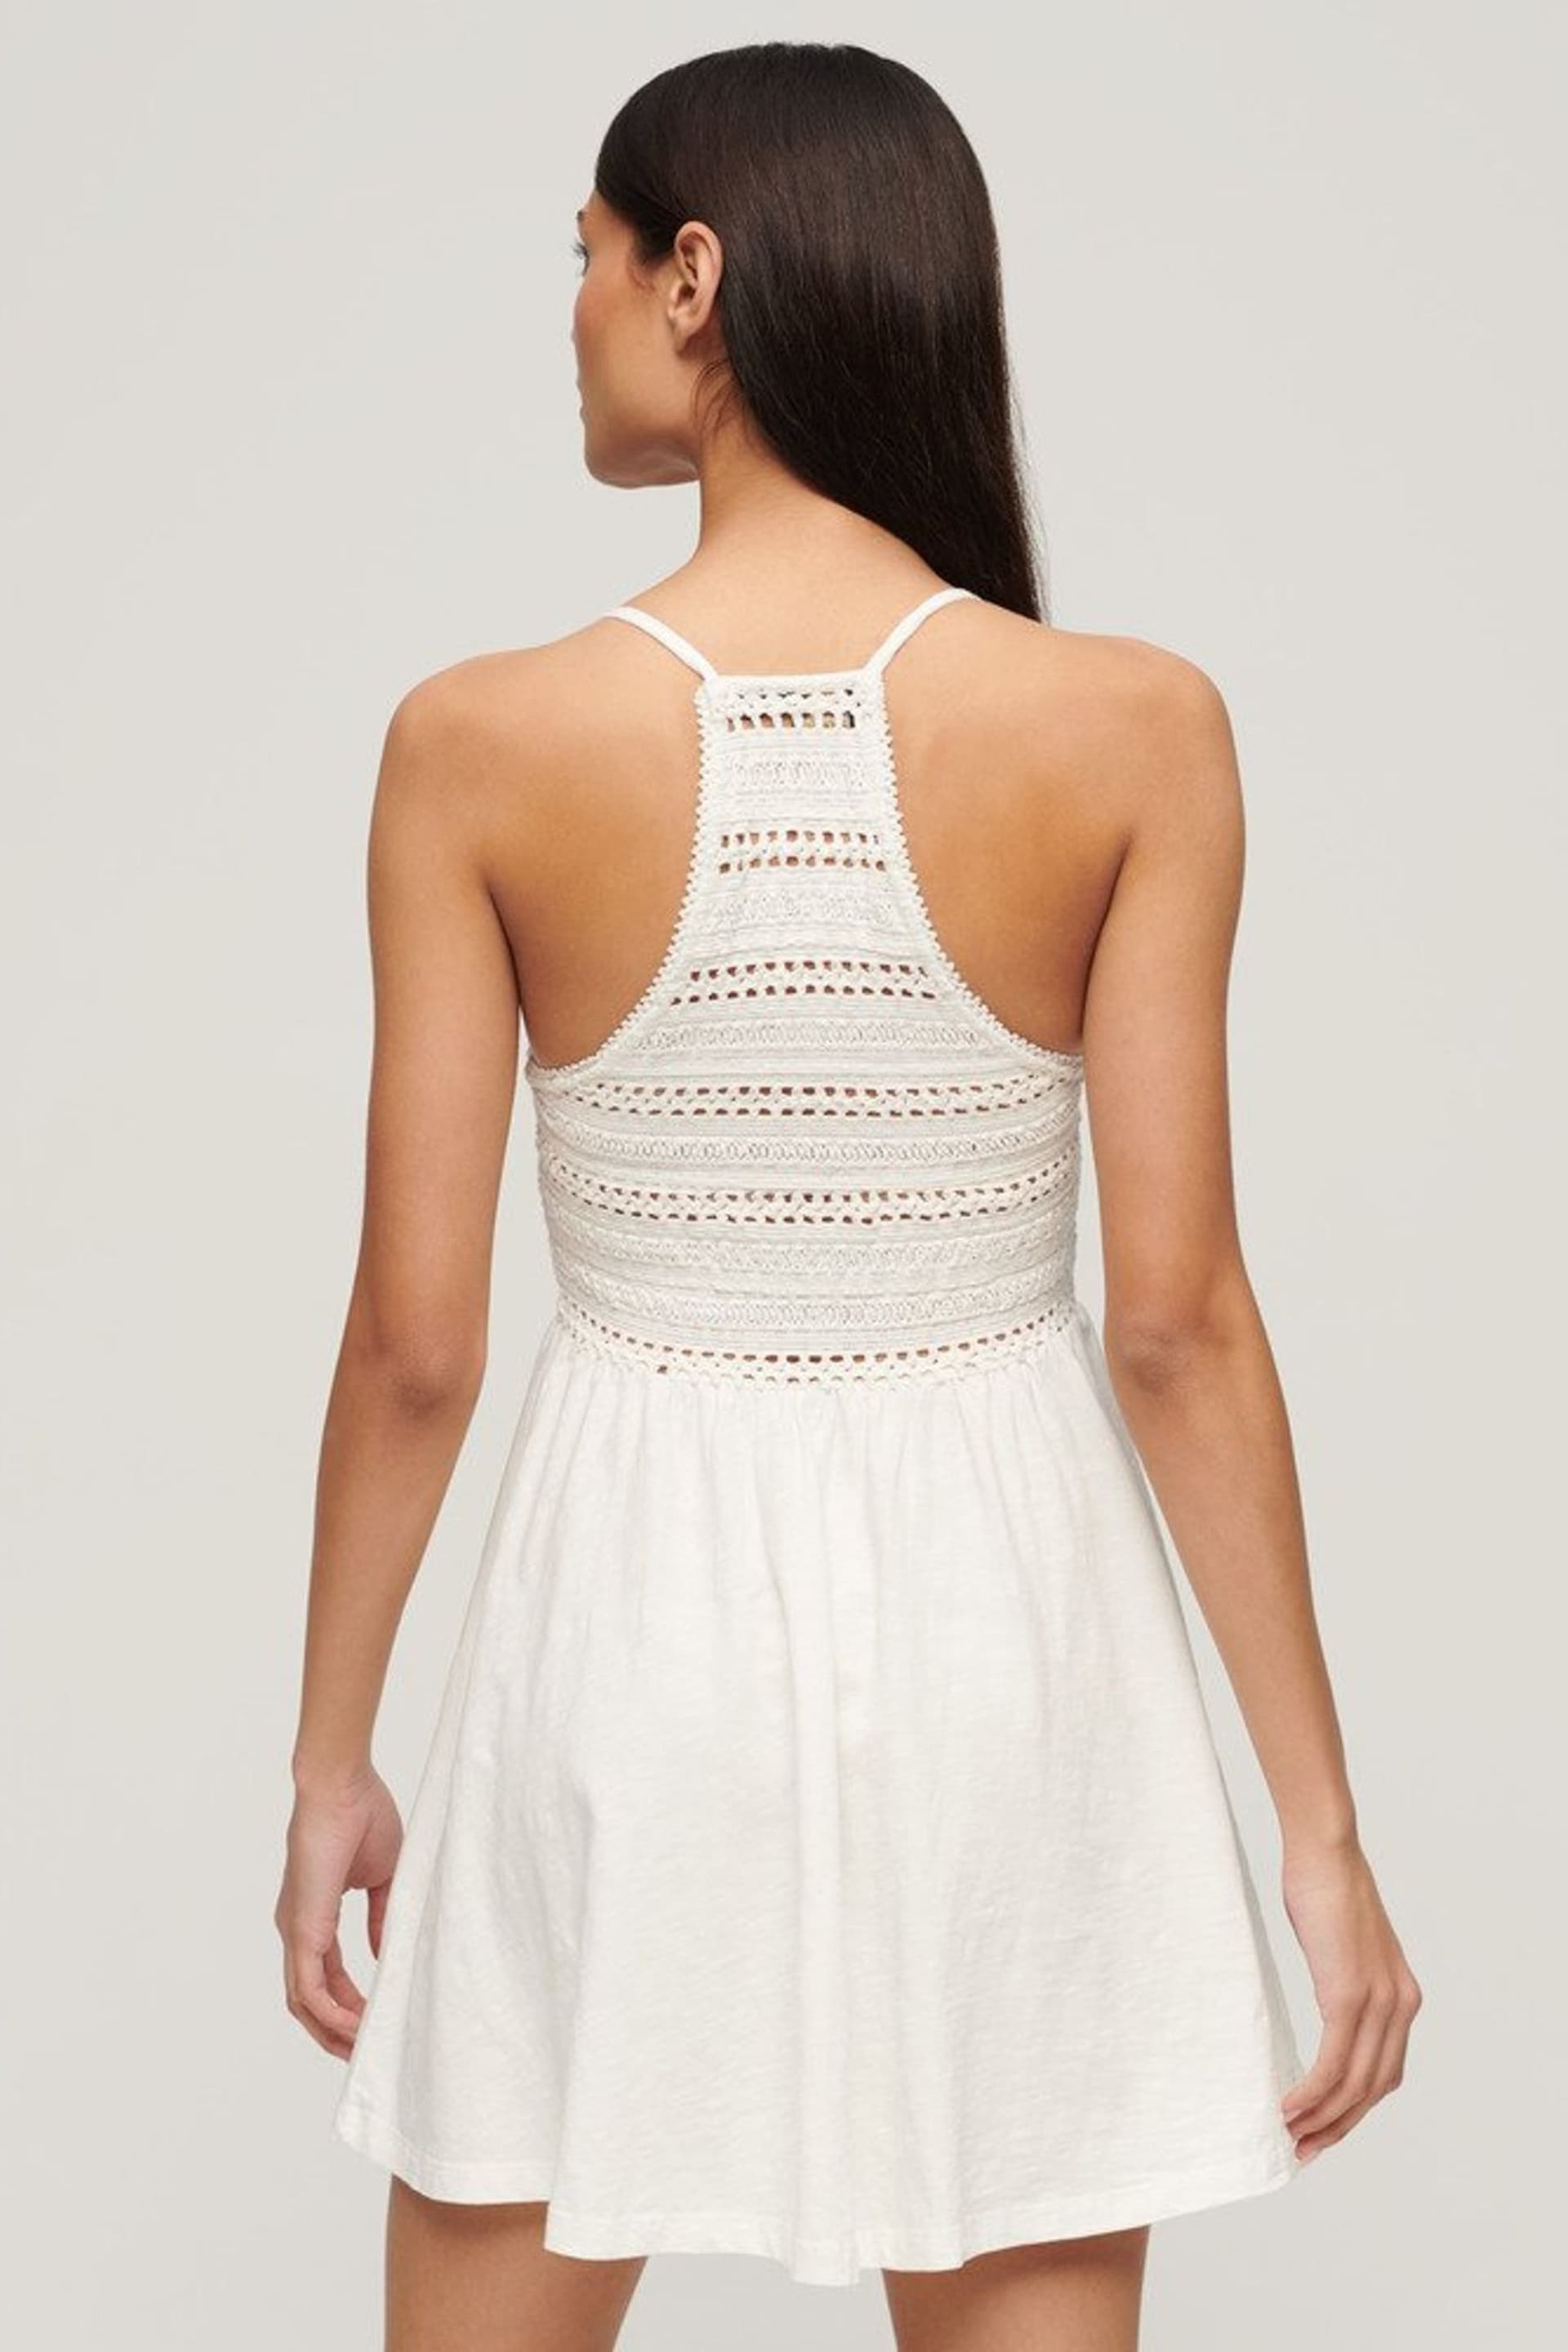 Superdry White Jersey Lace Mini Dress - Image 2 of 6